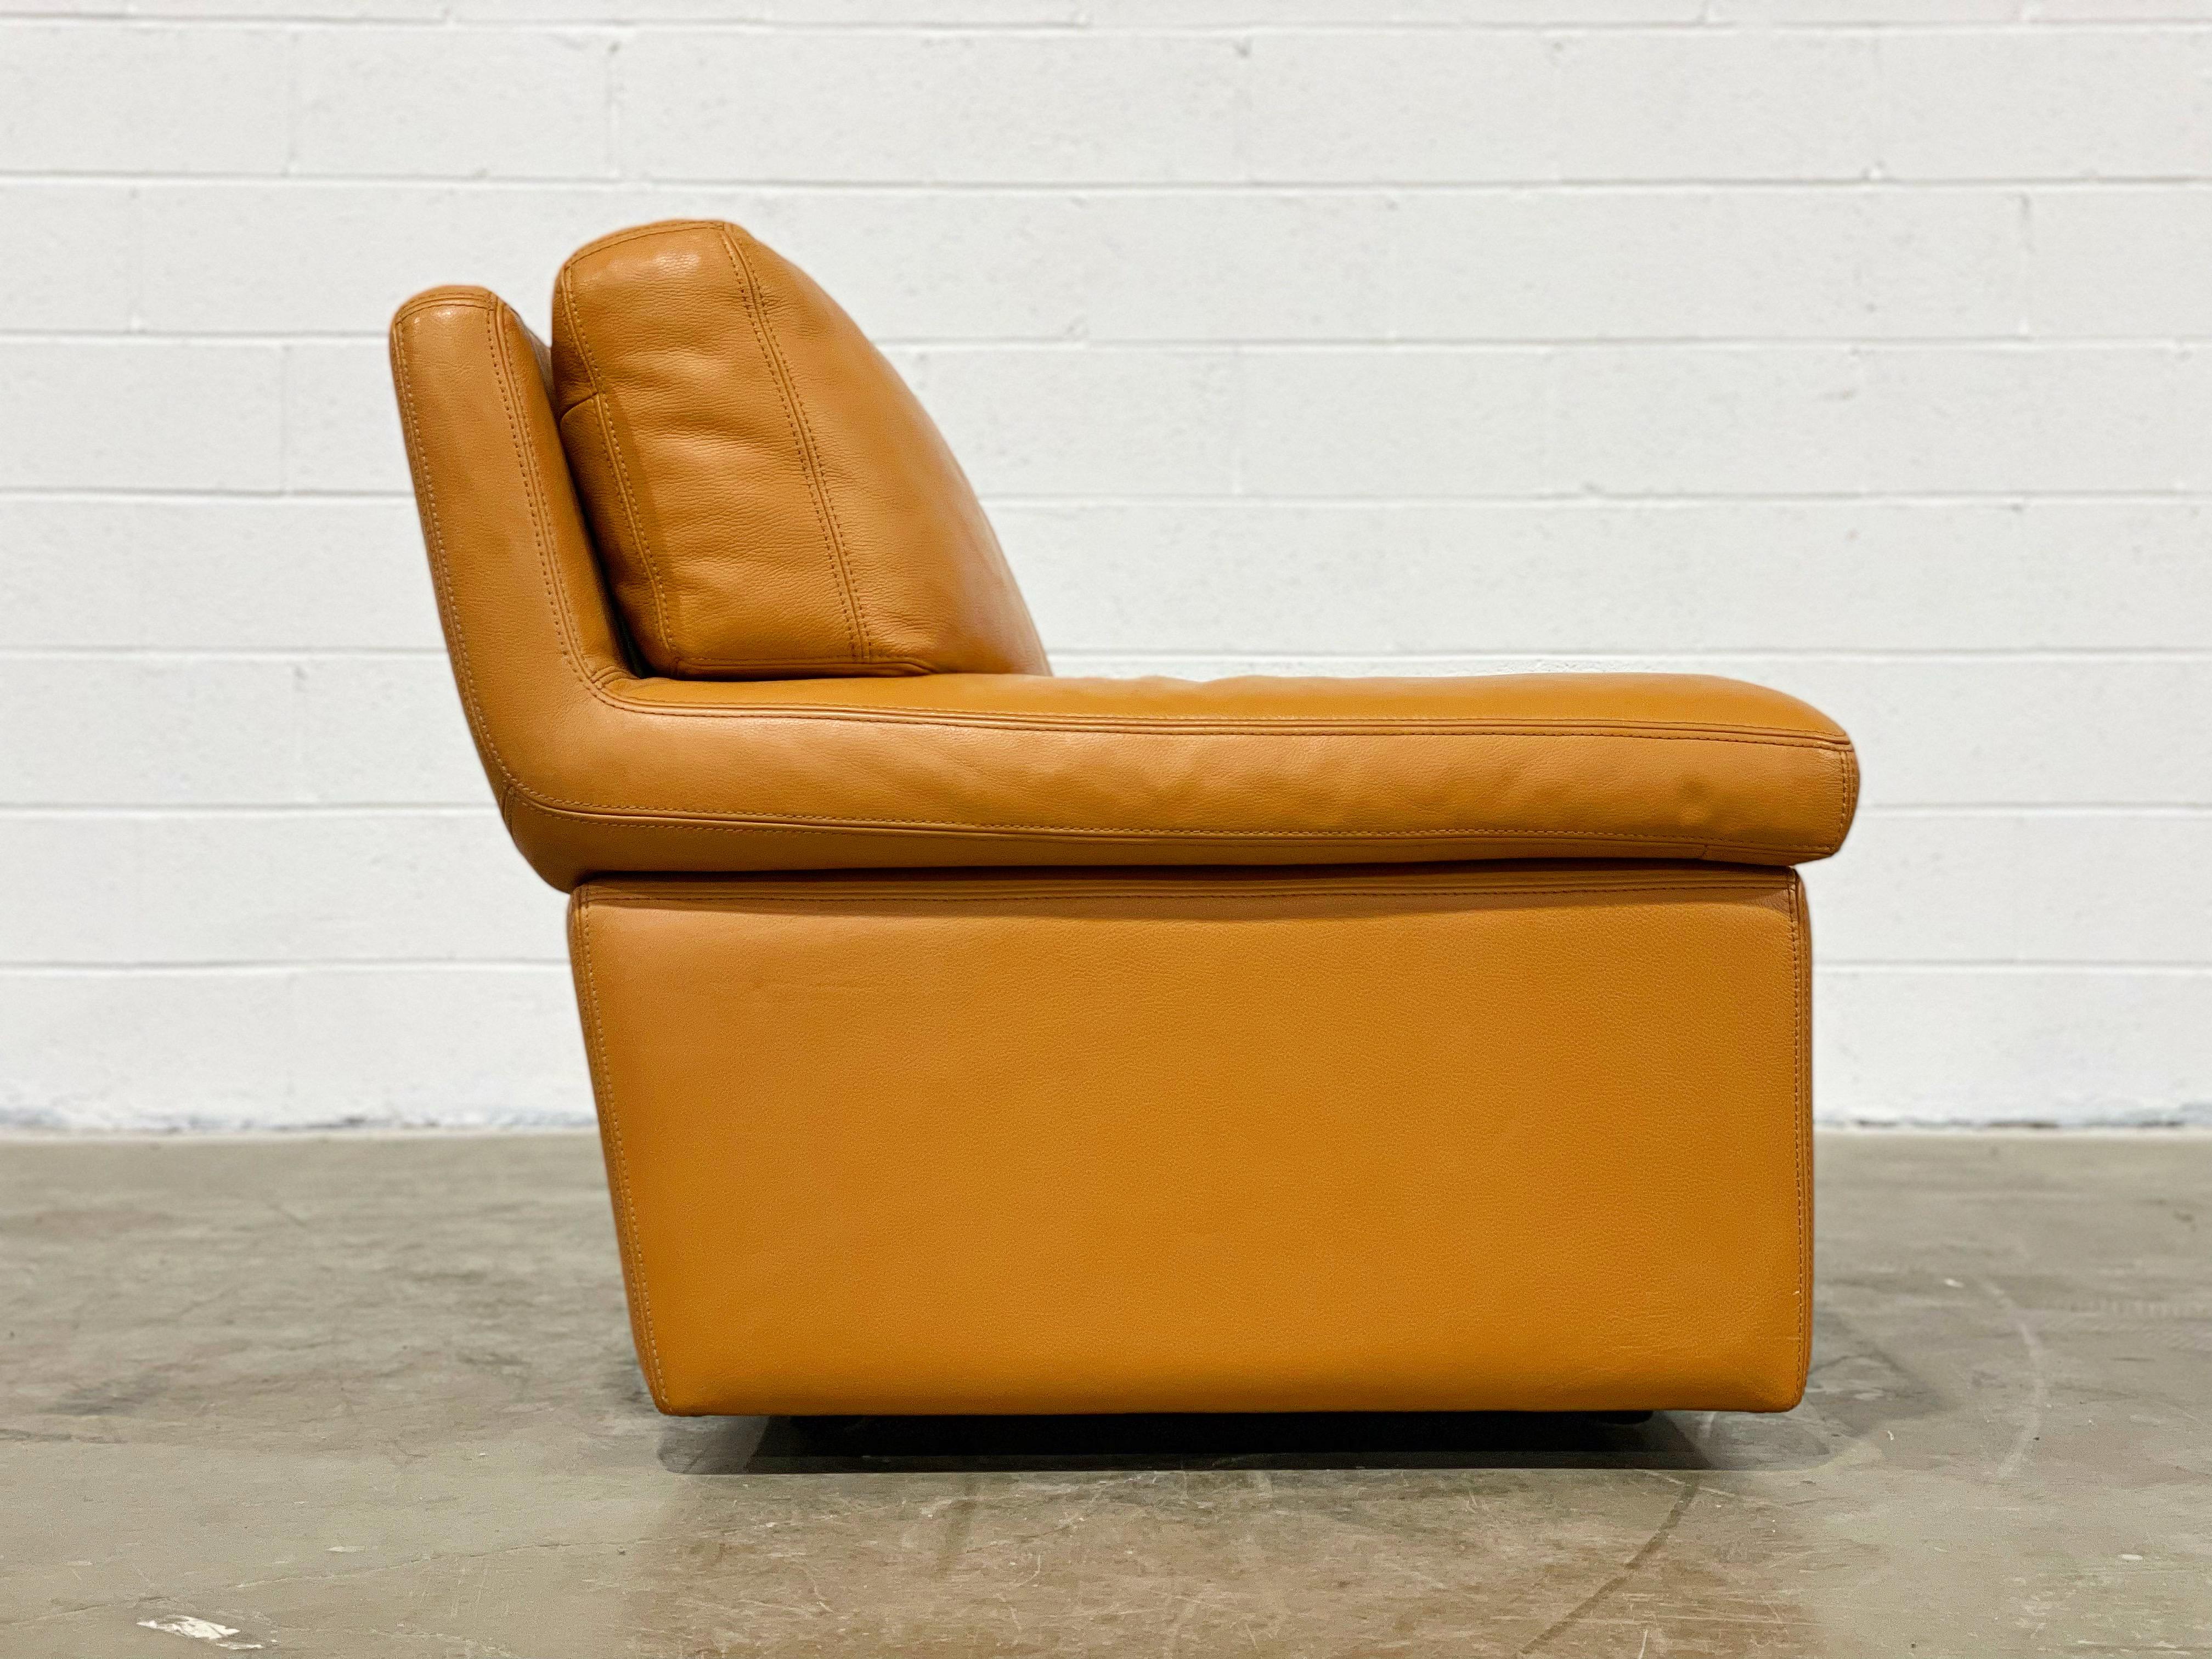 Post-Modern Roche Bobois Vintage Post Modern Leather Club Chair, Butterscotch Tone Leather